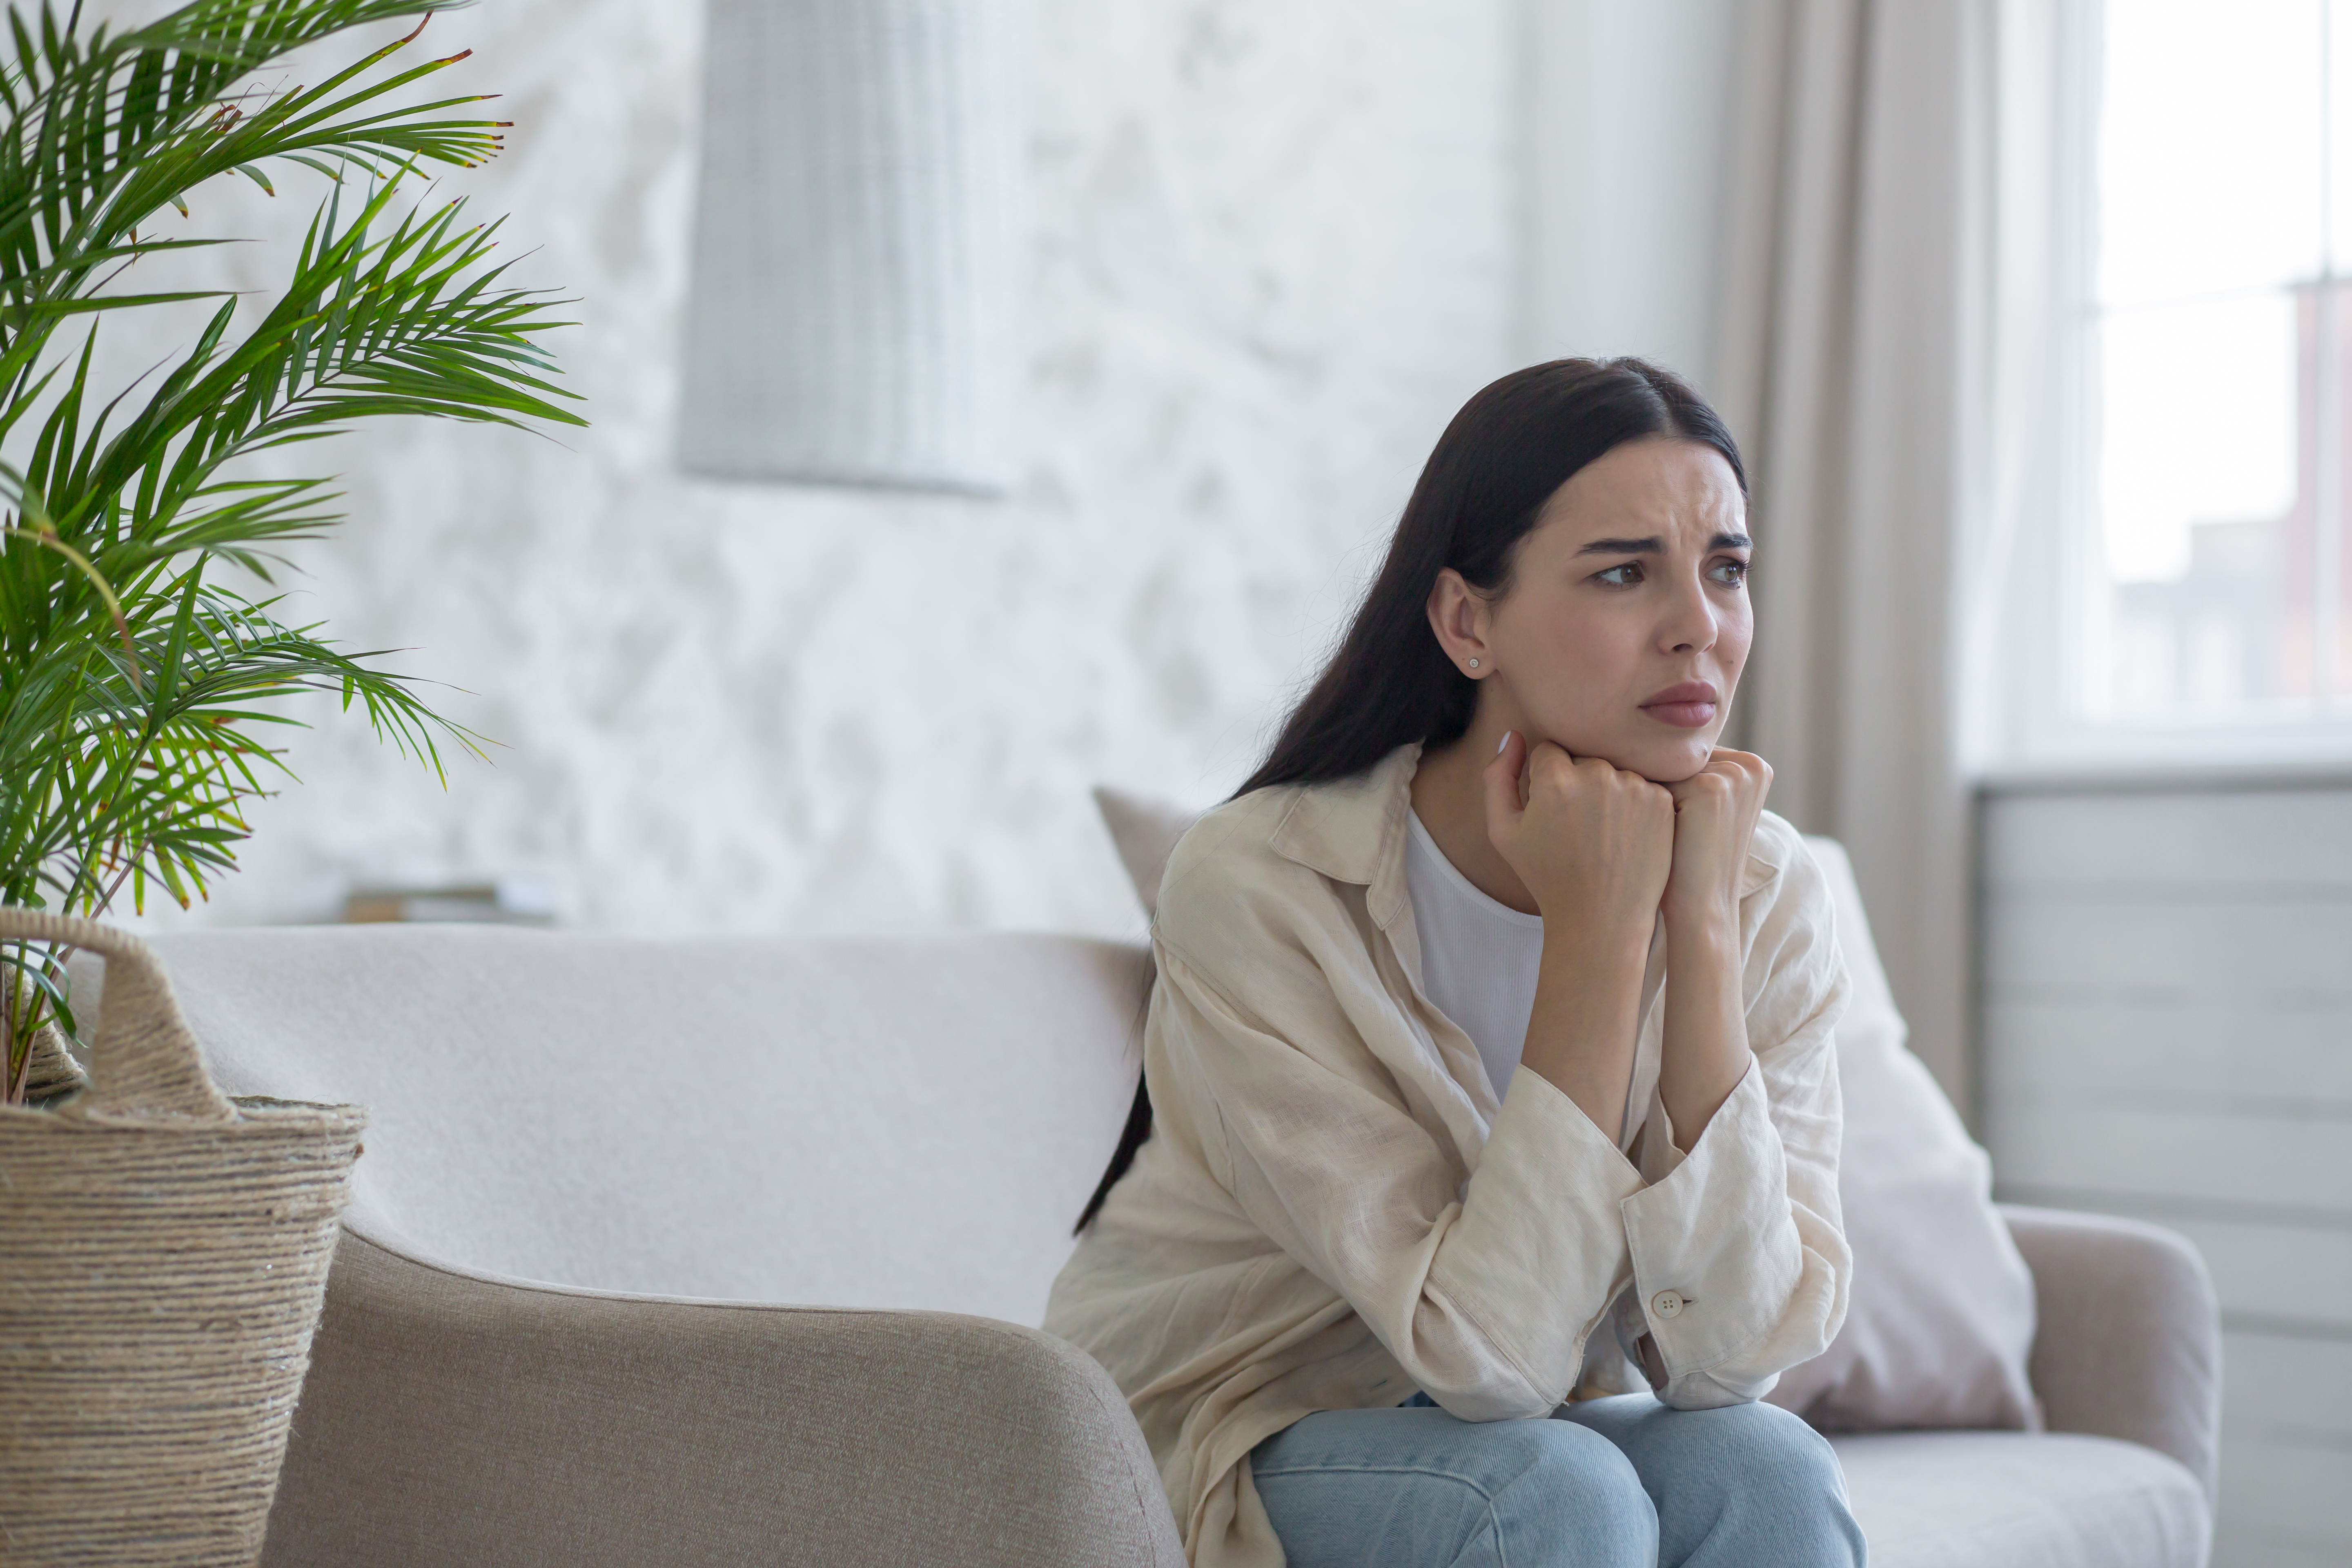 A sad and disappointed woman is alone at home sitting on the couch in depression, thinking